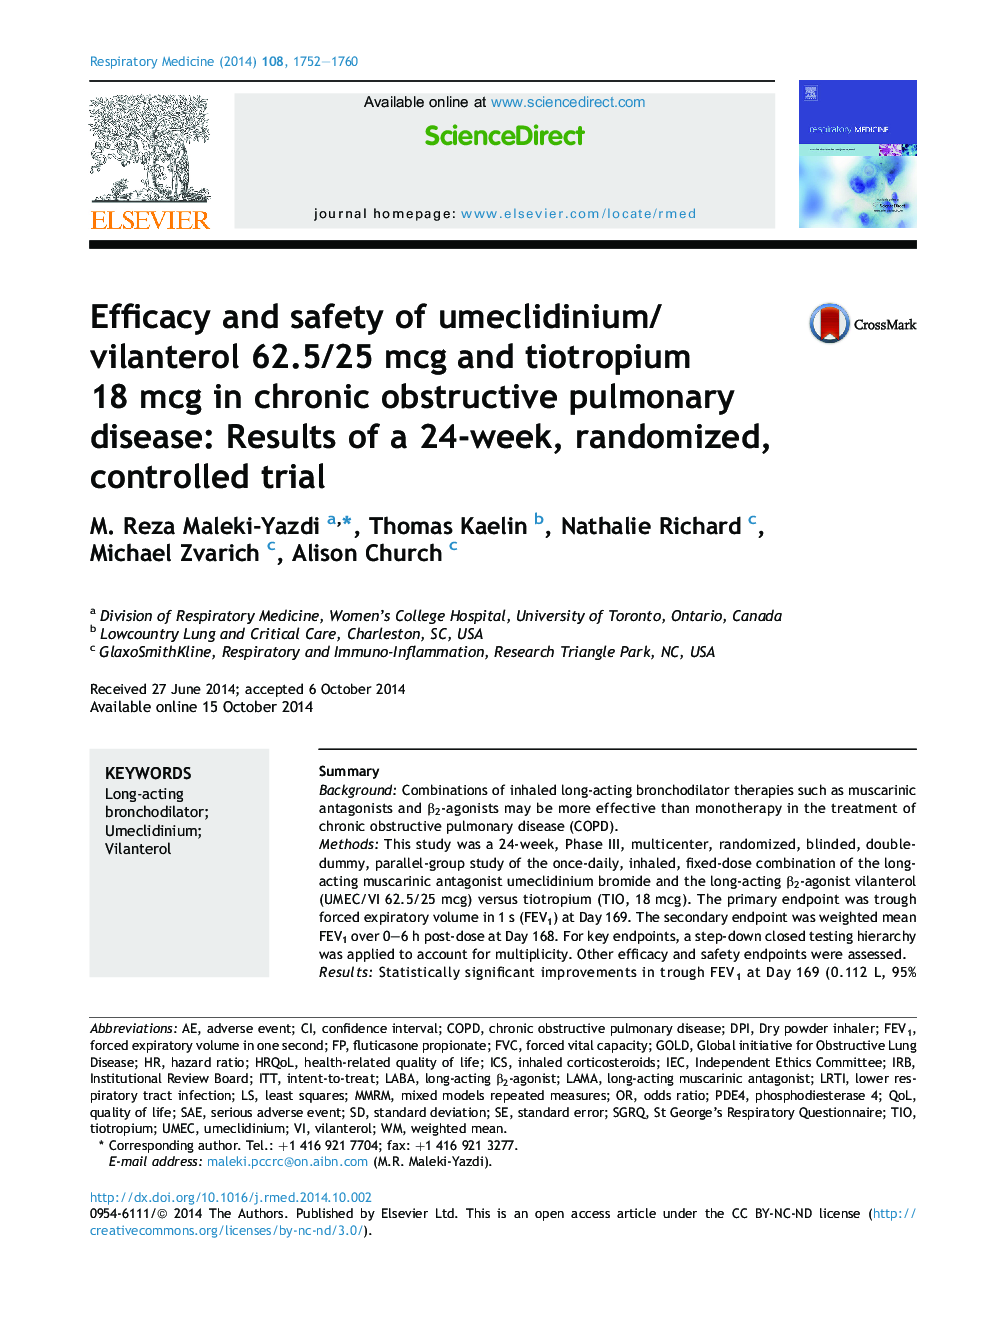 Efficacy and safety of umeclidinium/vilanterol 62.5/25Â mcg and tiotropium 18Â mcg in chronic obstructive pulmonary disease: Results of a 24-week, randomized, controlled trial